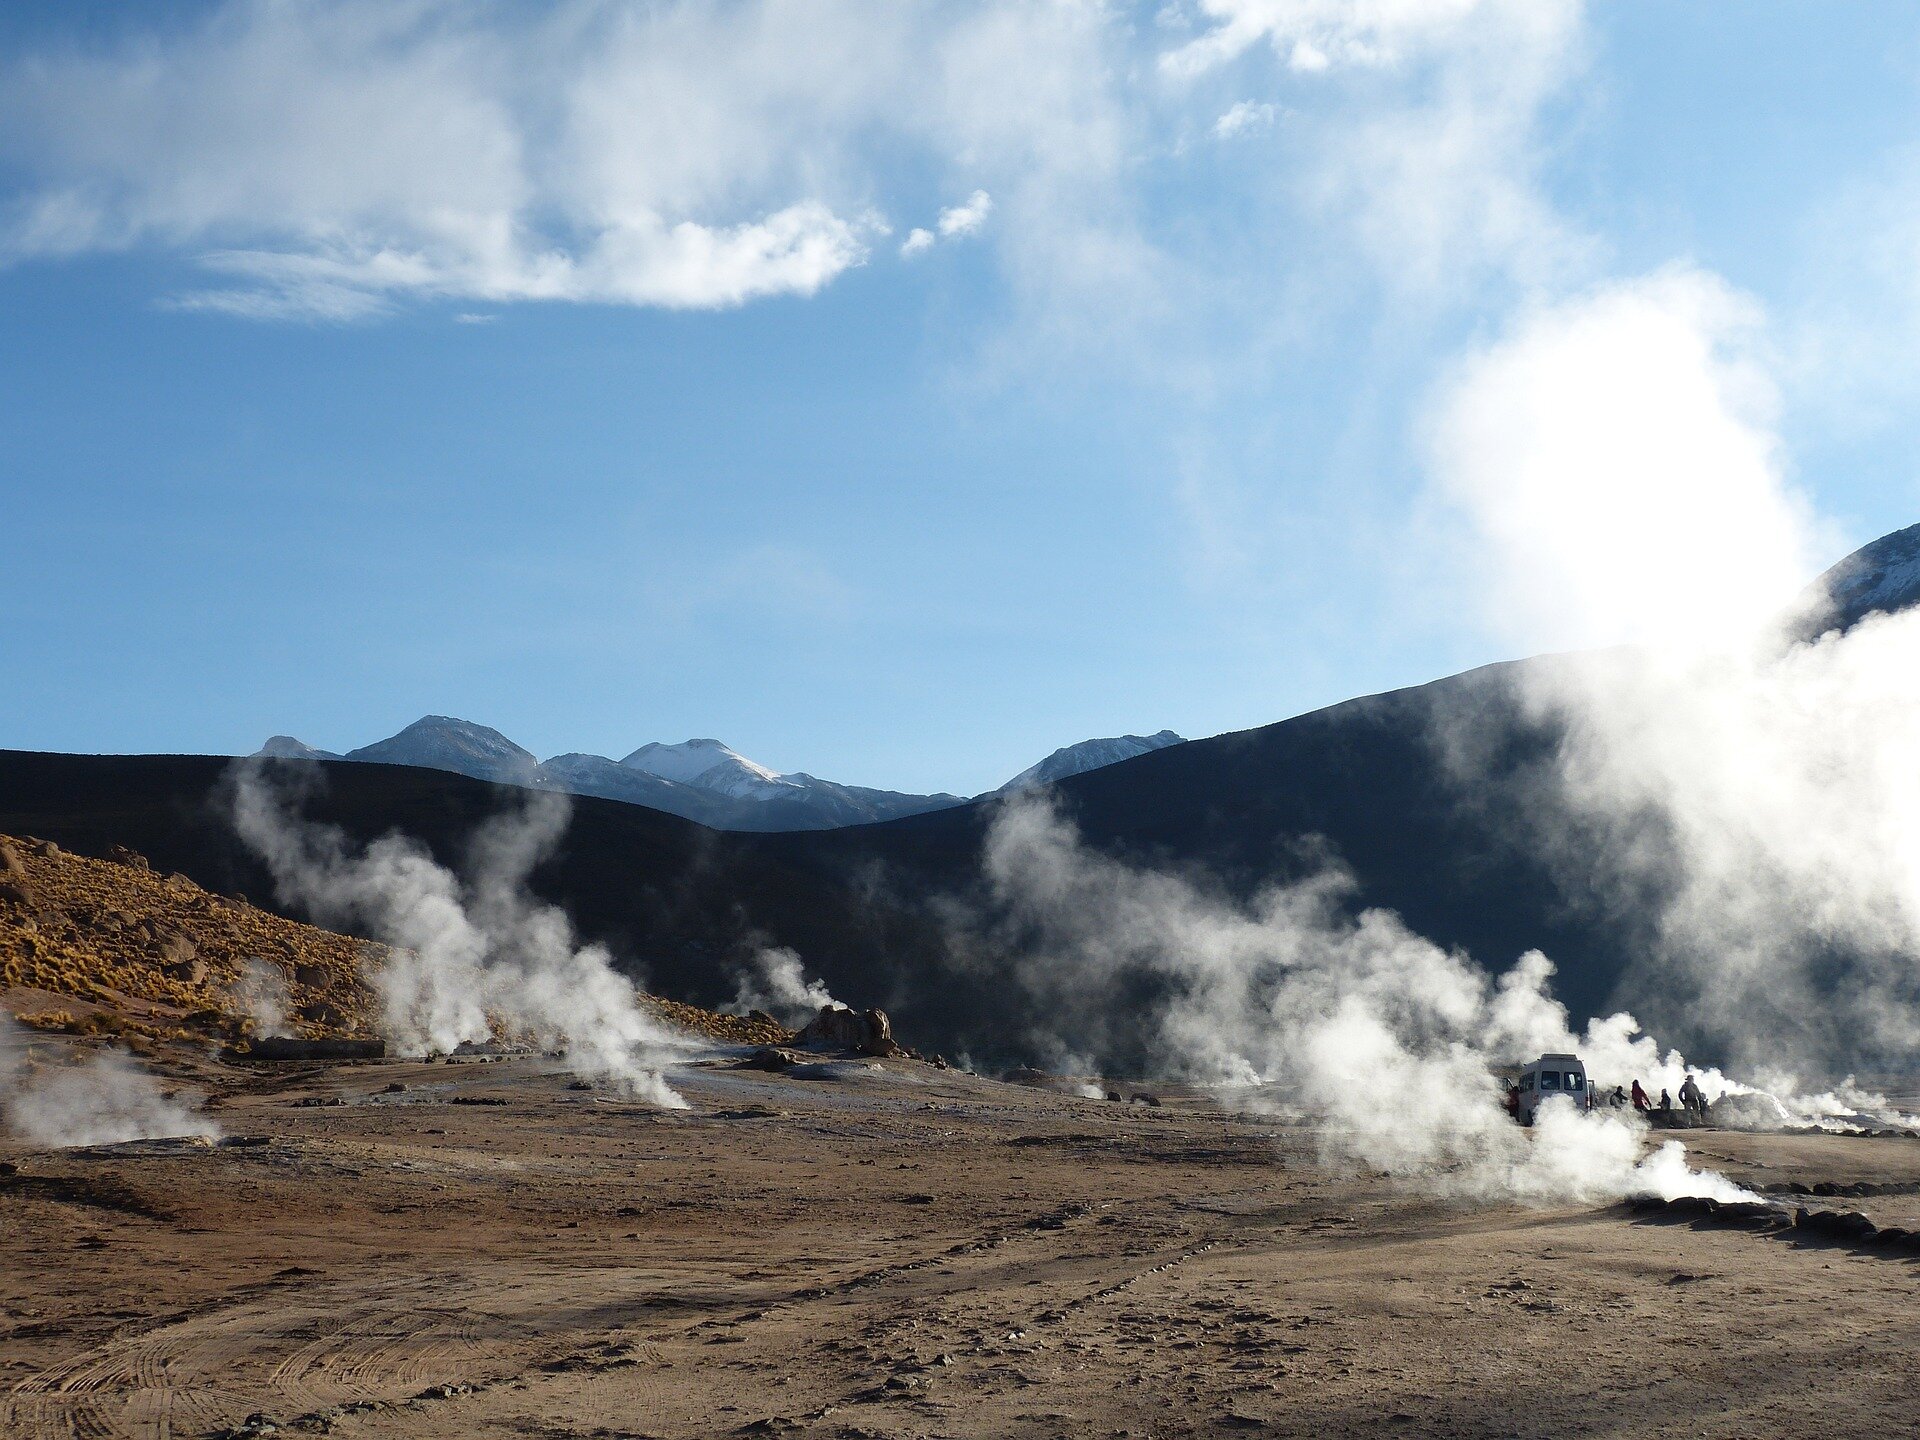 New research uses geothermal energy to slash emissions